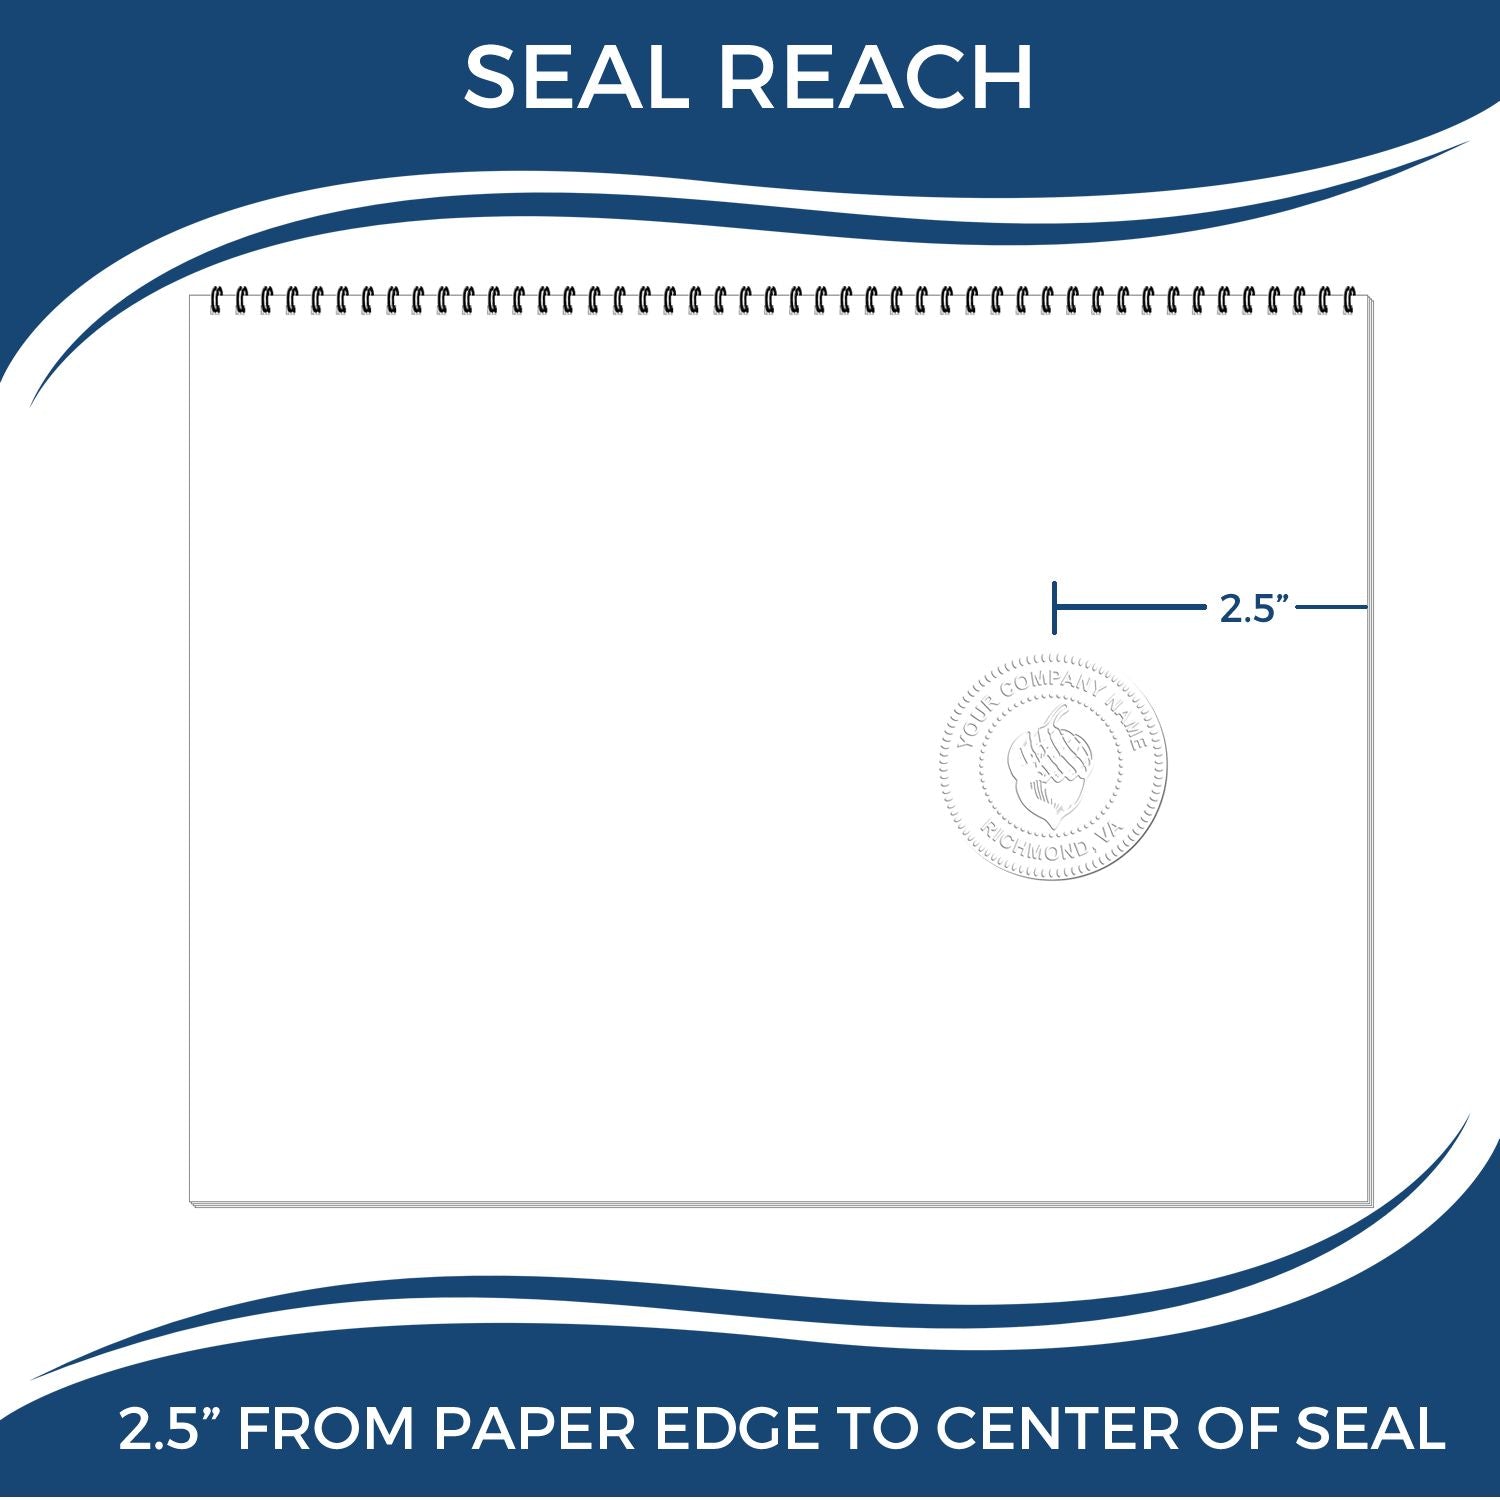 An infographic showing the seal reach which is represented by a ruler and a miniature seal image of the Heavy Duty Cast Iron Mississippi Land Surveyor Seal Embosser